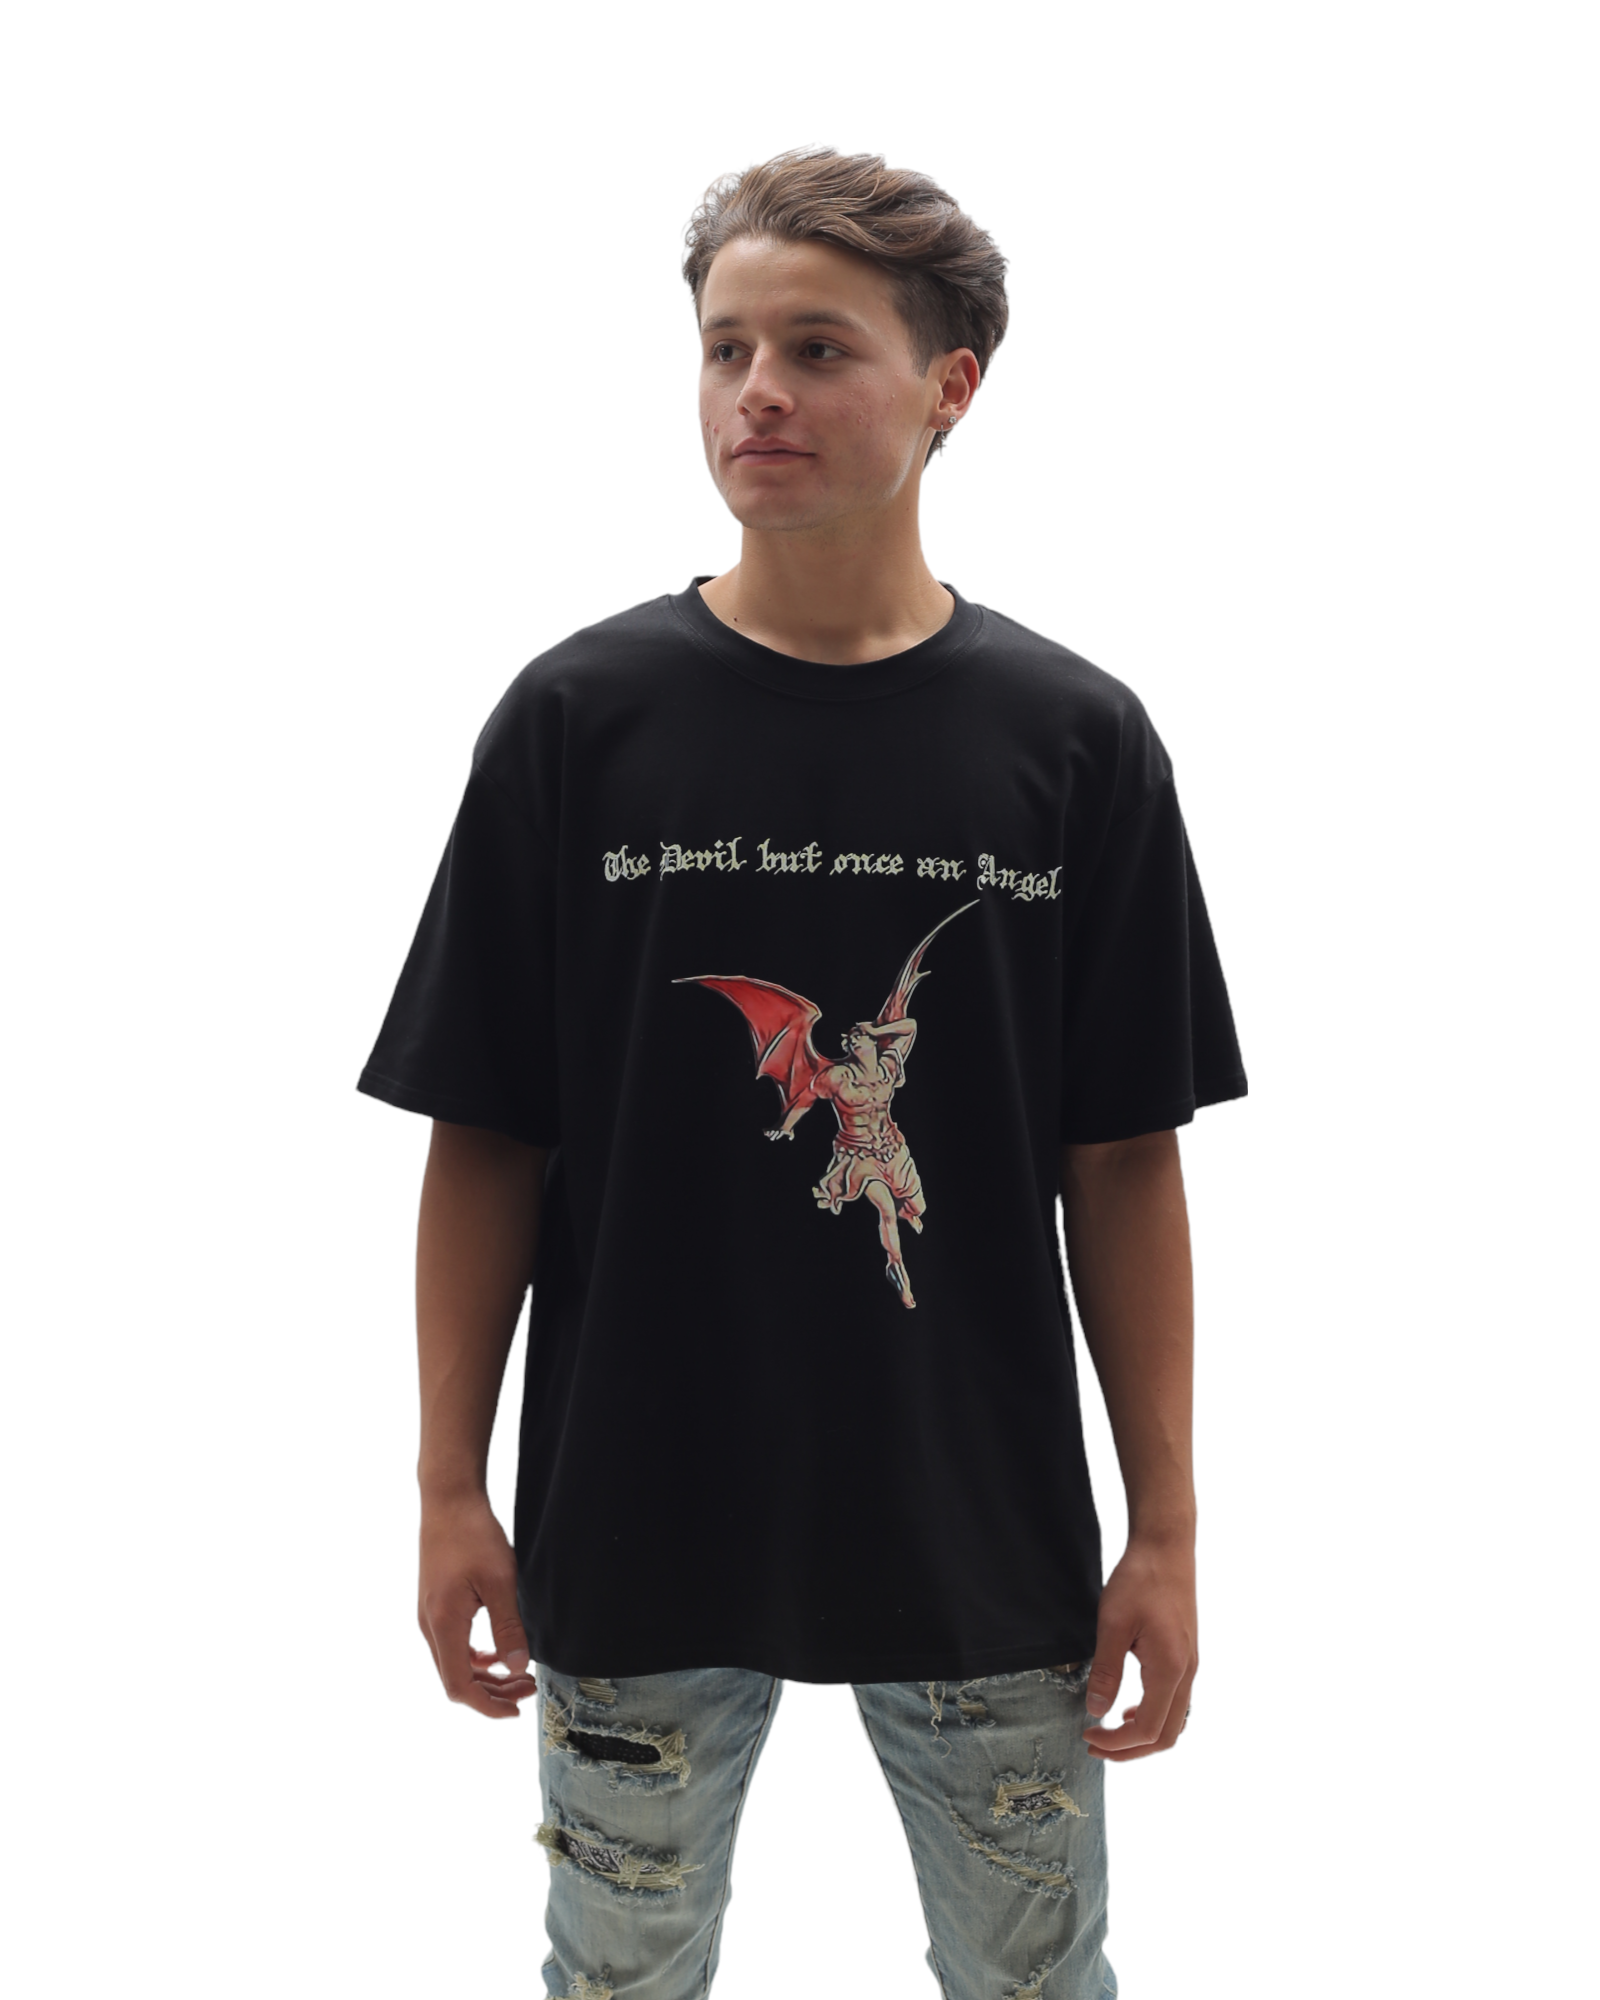 The Devil but Once an Angel - T-Shirt - Black